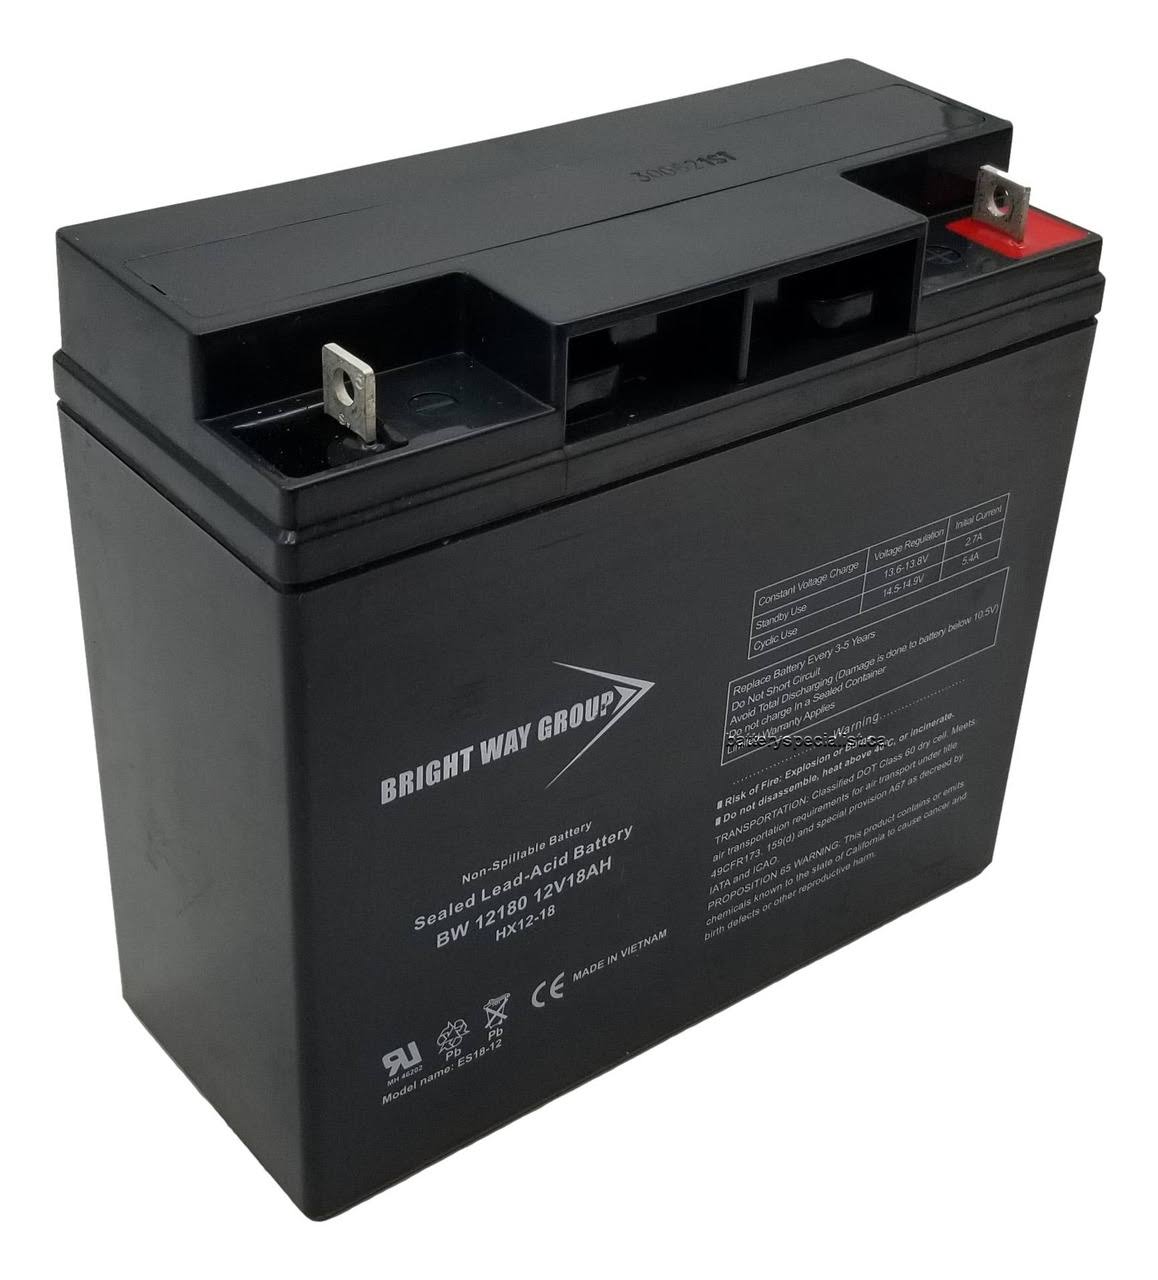 Bright Way Group Bwg 12180 Nb Battery